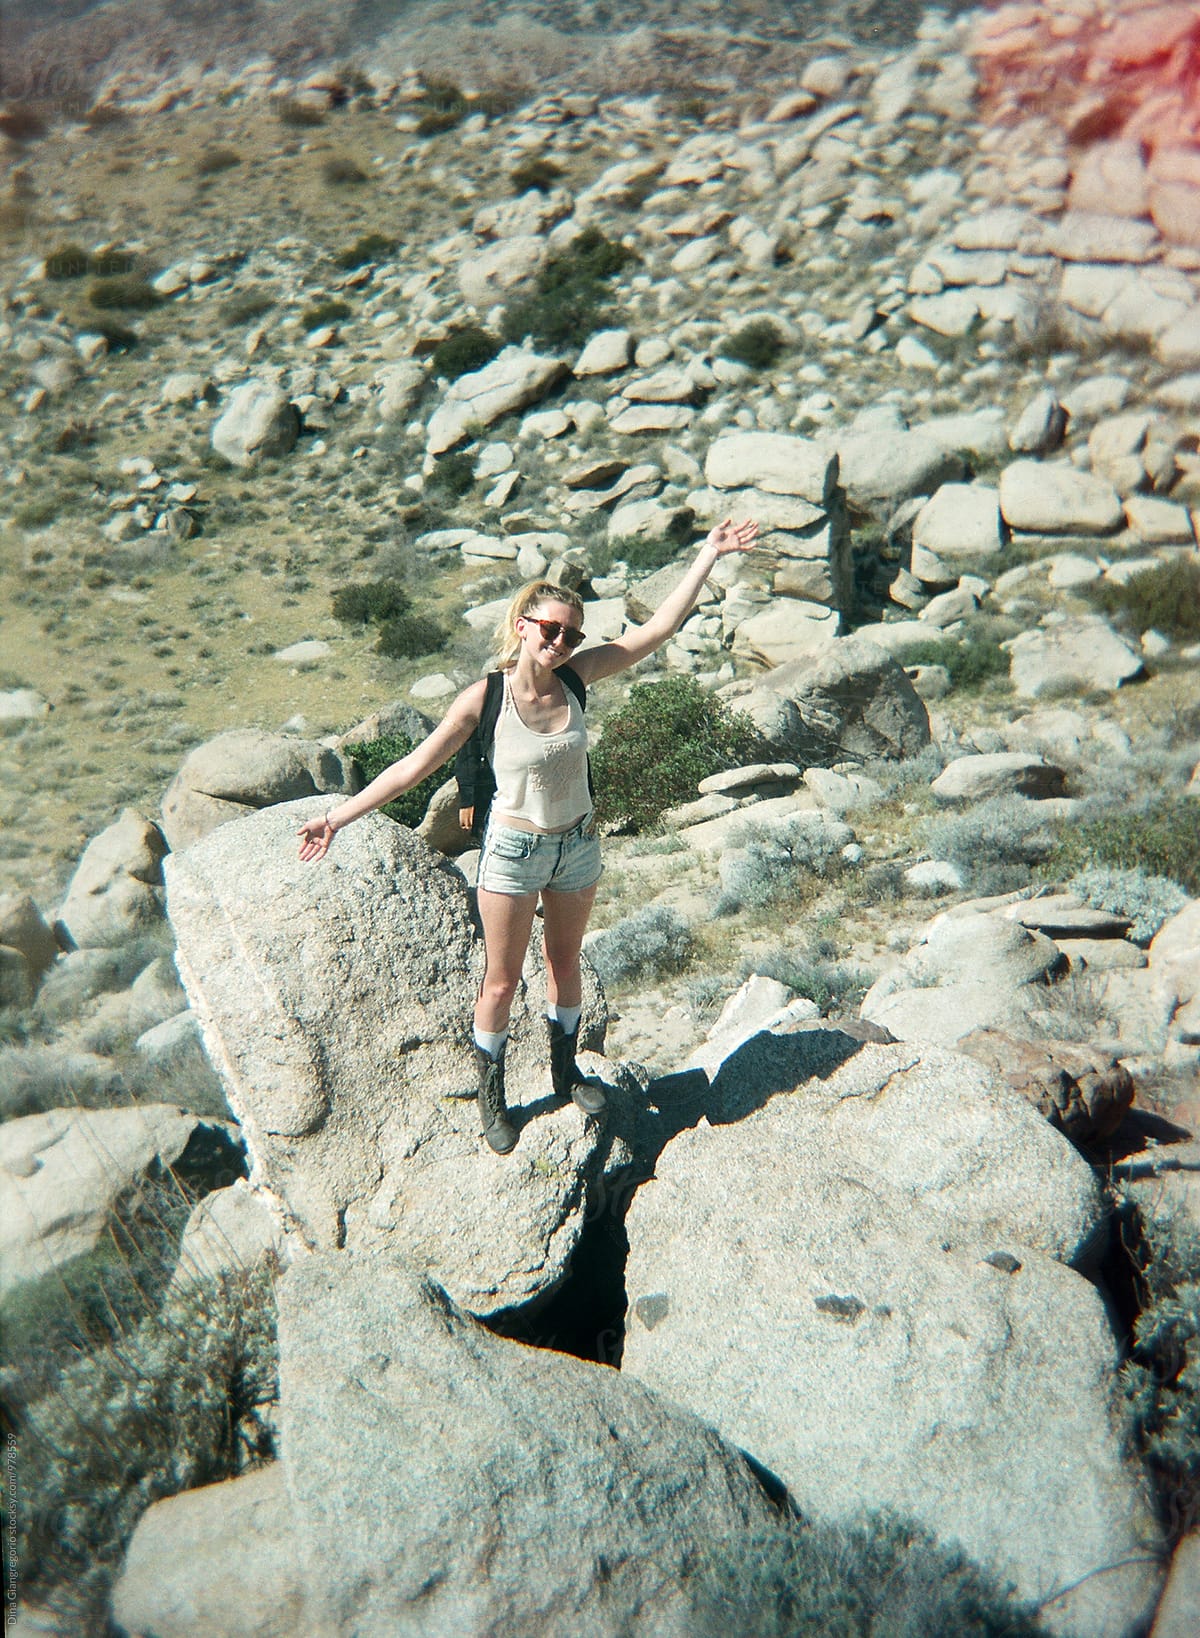 Hiker Girl Standing On Pile Of Rocks With Arms Stretched Out By Stocksy Contributor Dina